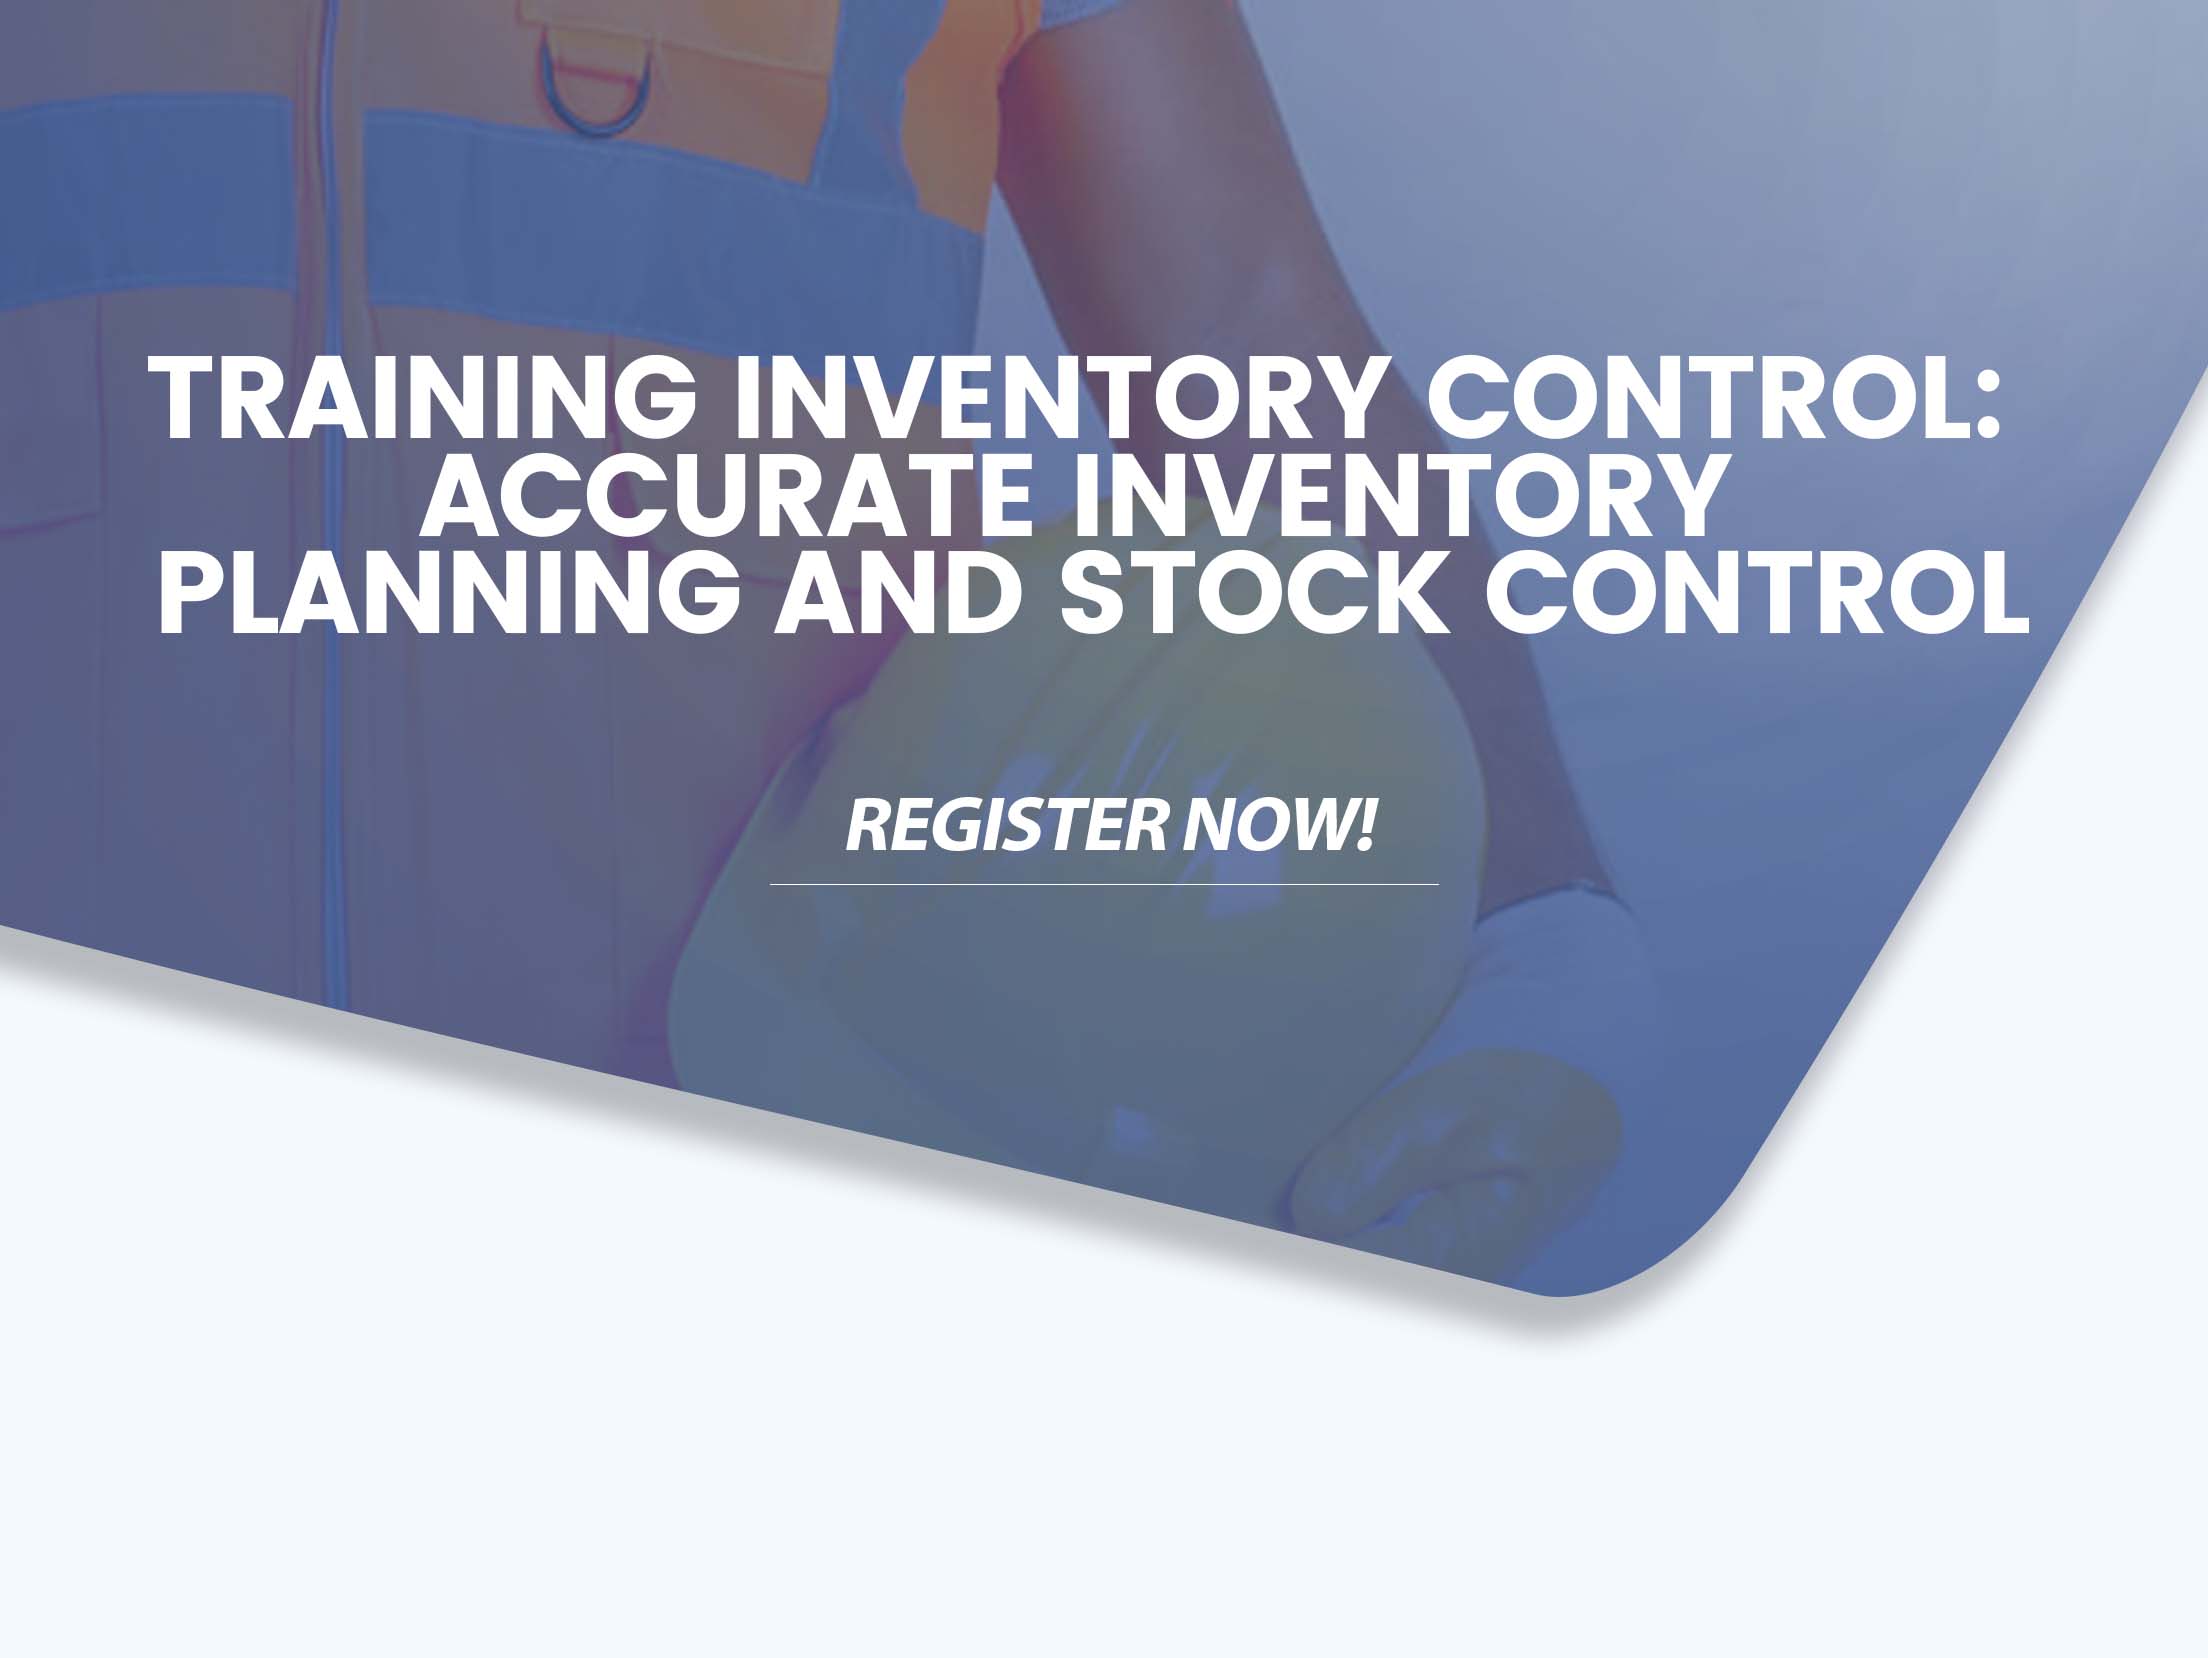 Training Inventory Control Accurate Inventory Planning and Stock Control